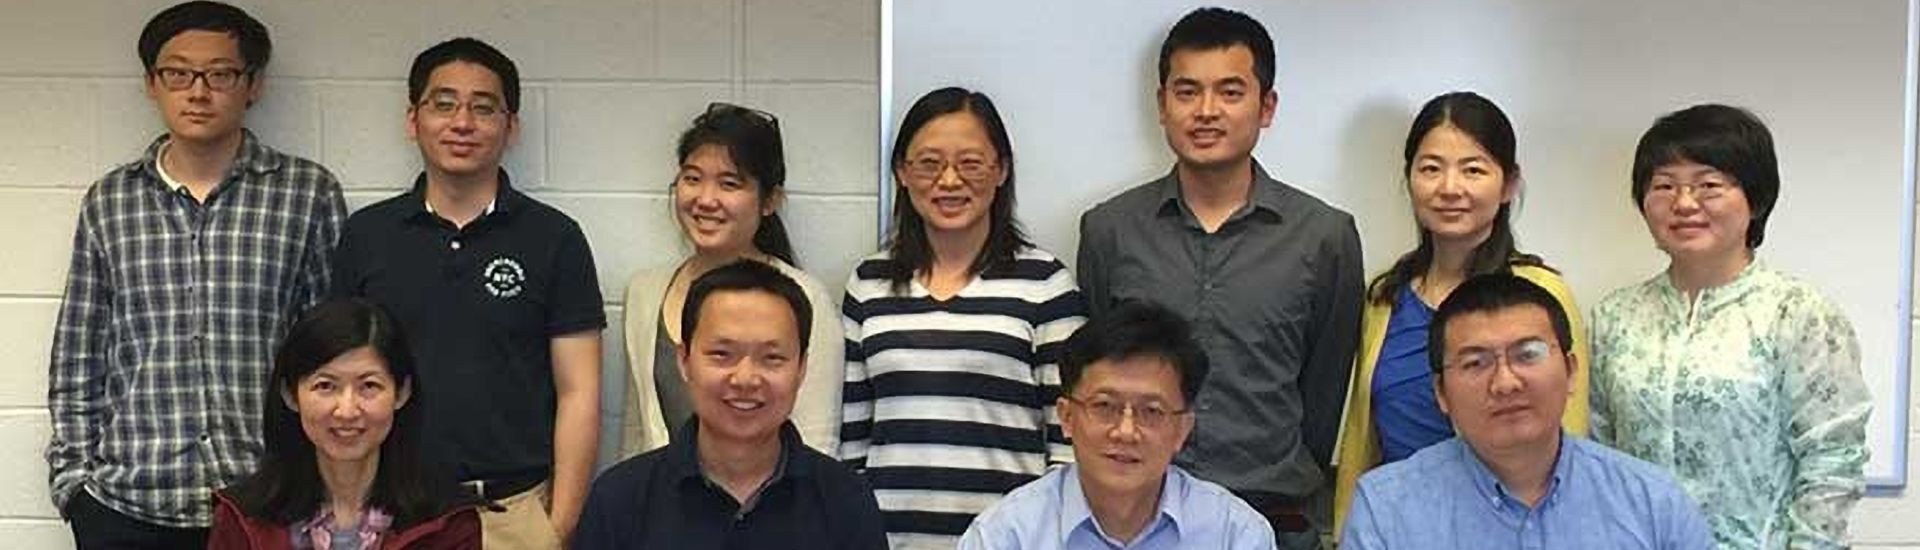 group photo of lab members